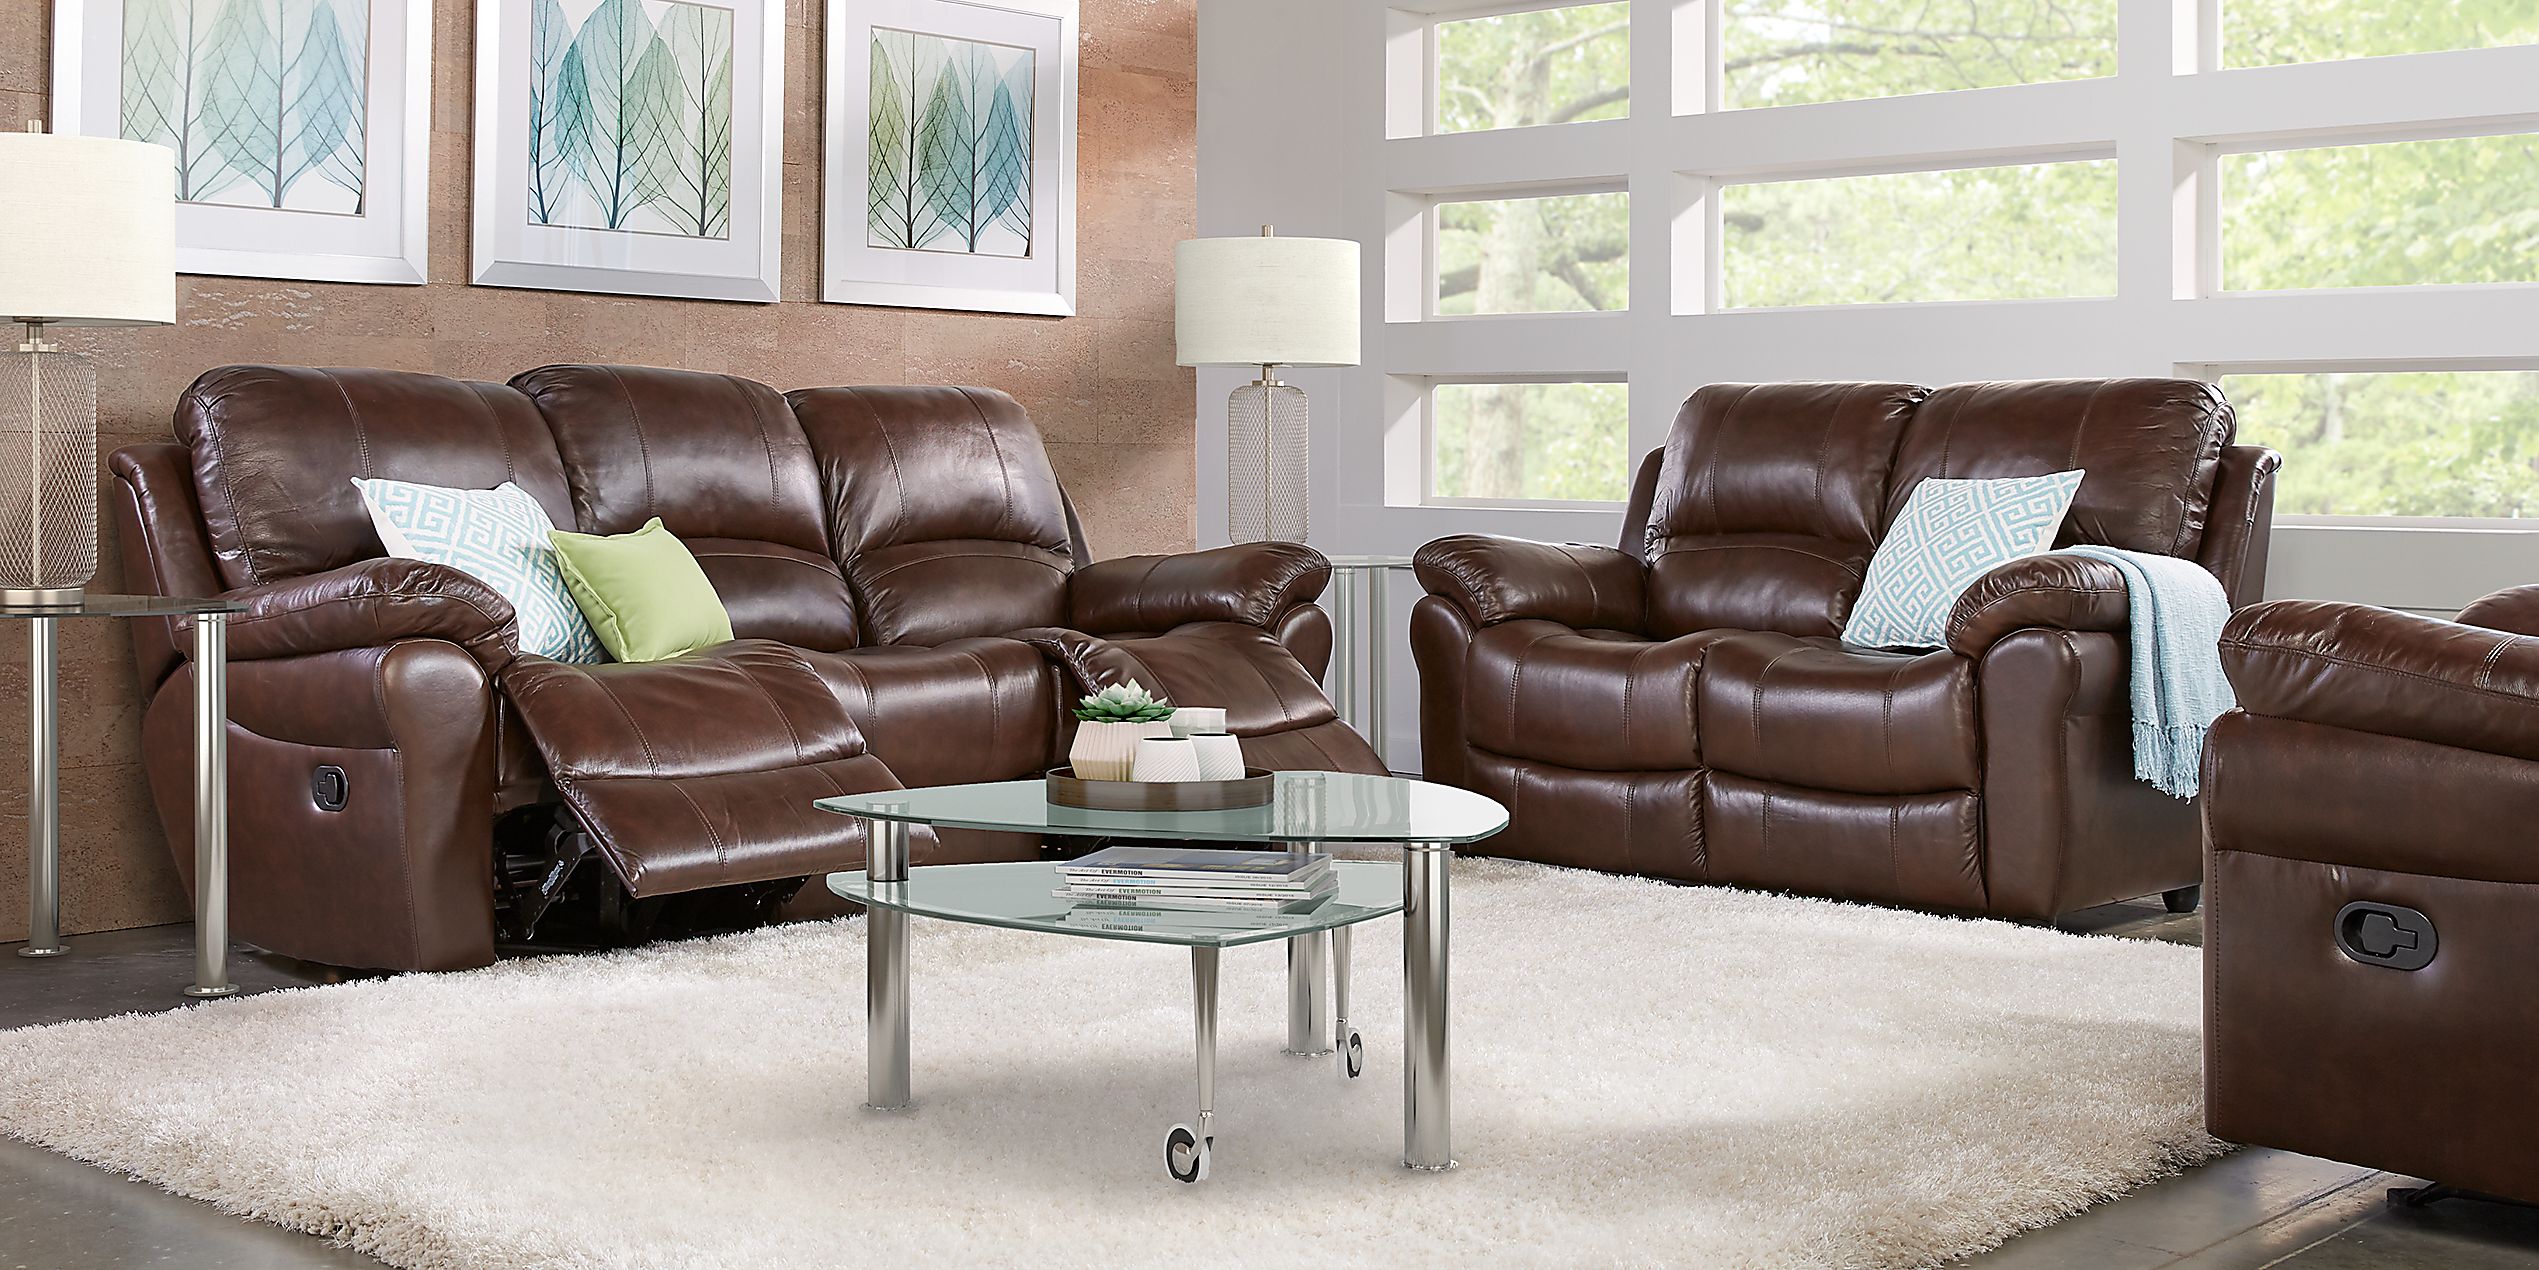 vercelli stone leather reclining sofa reviews